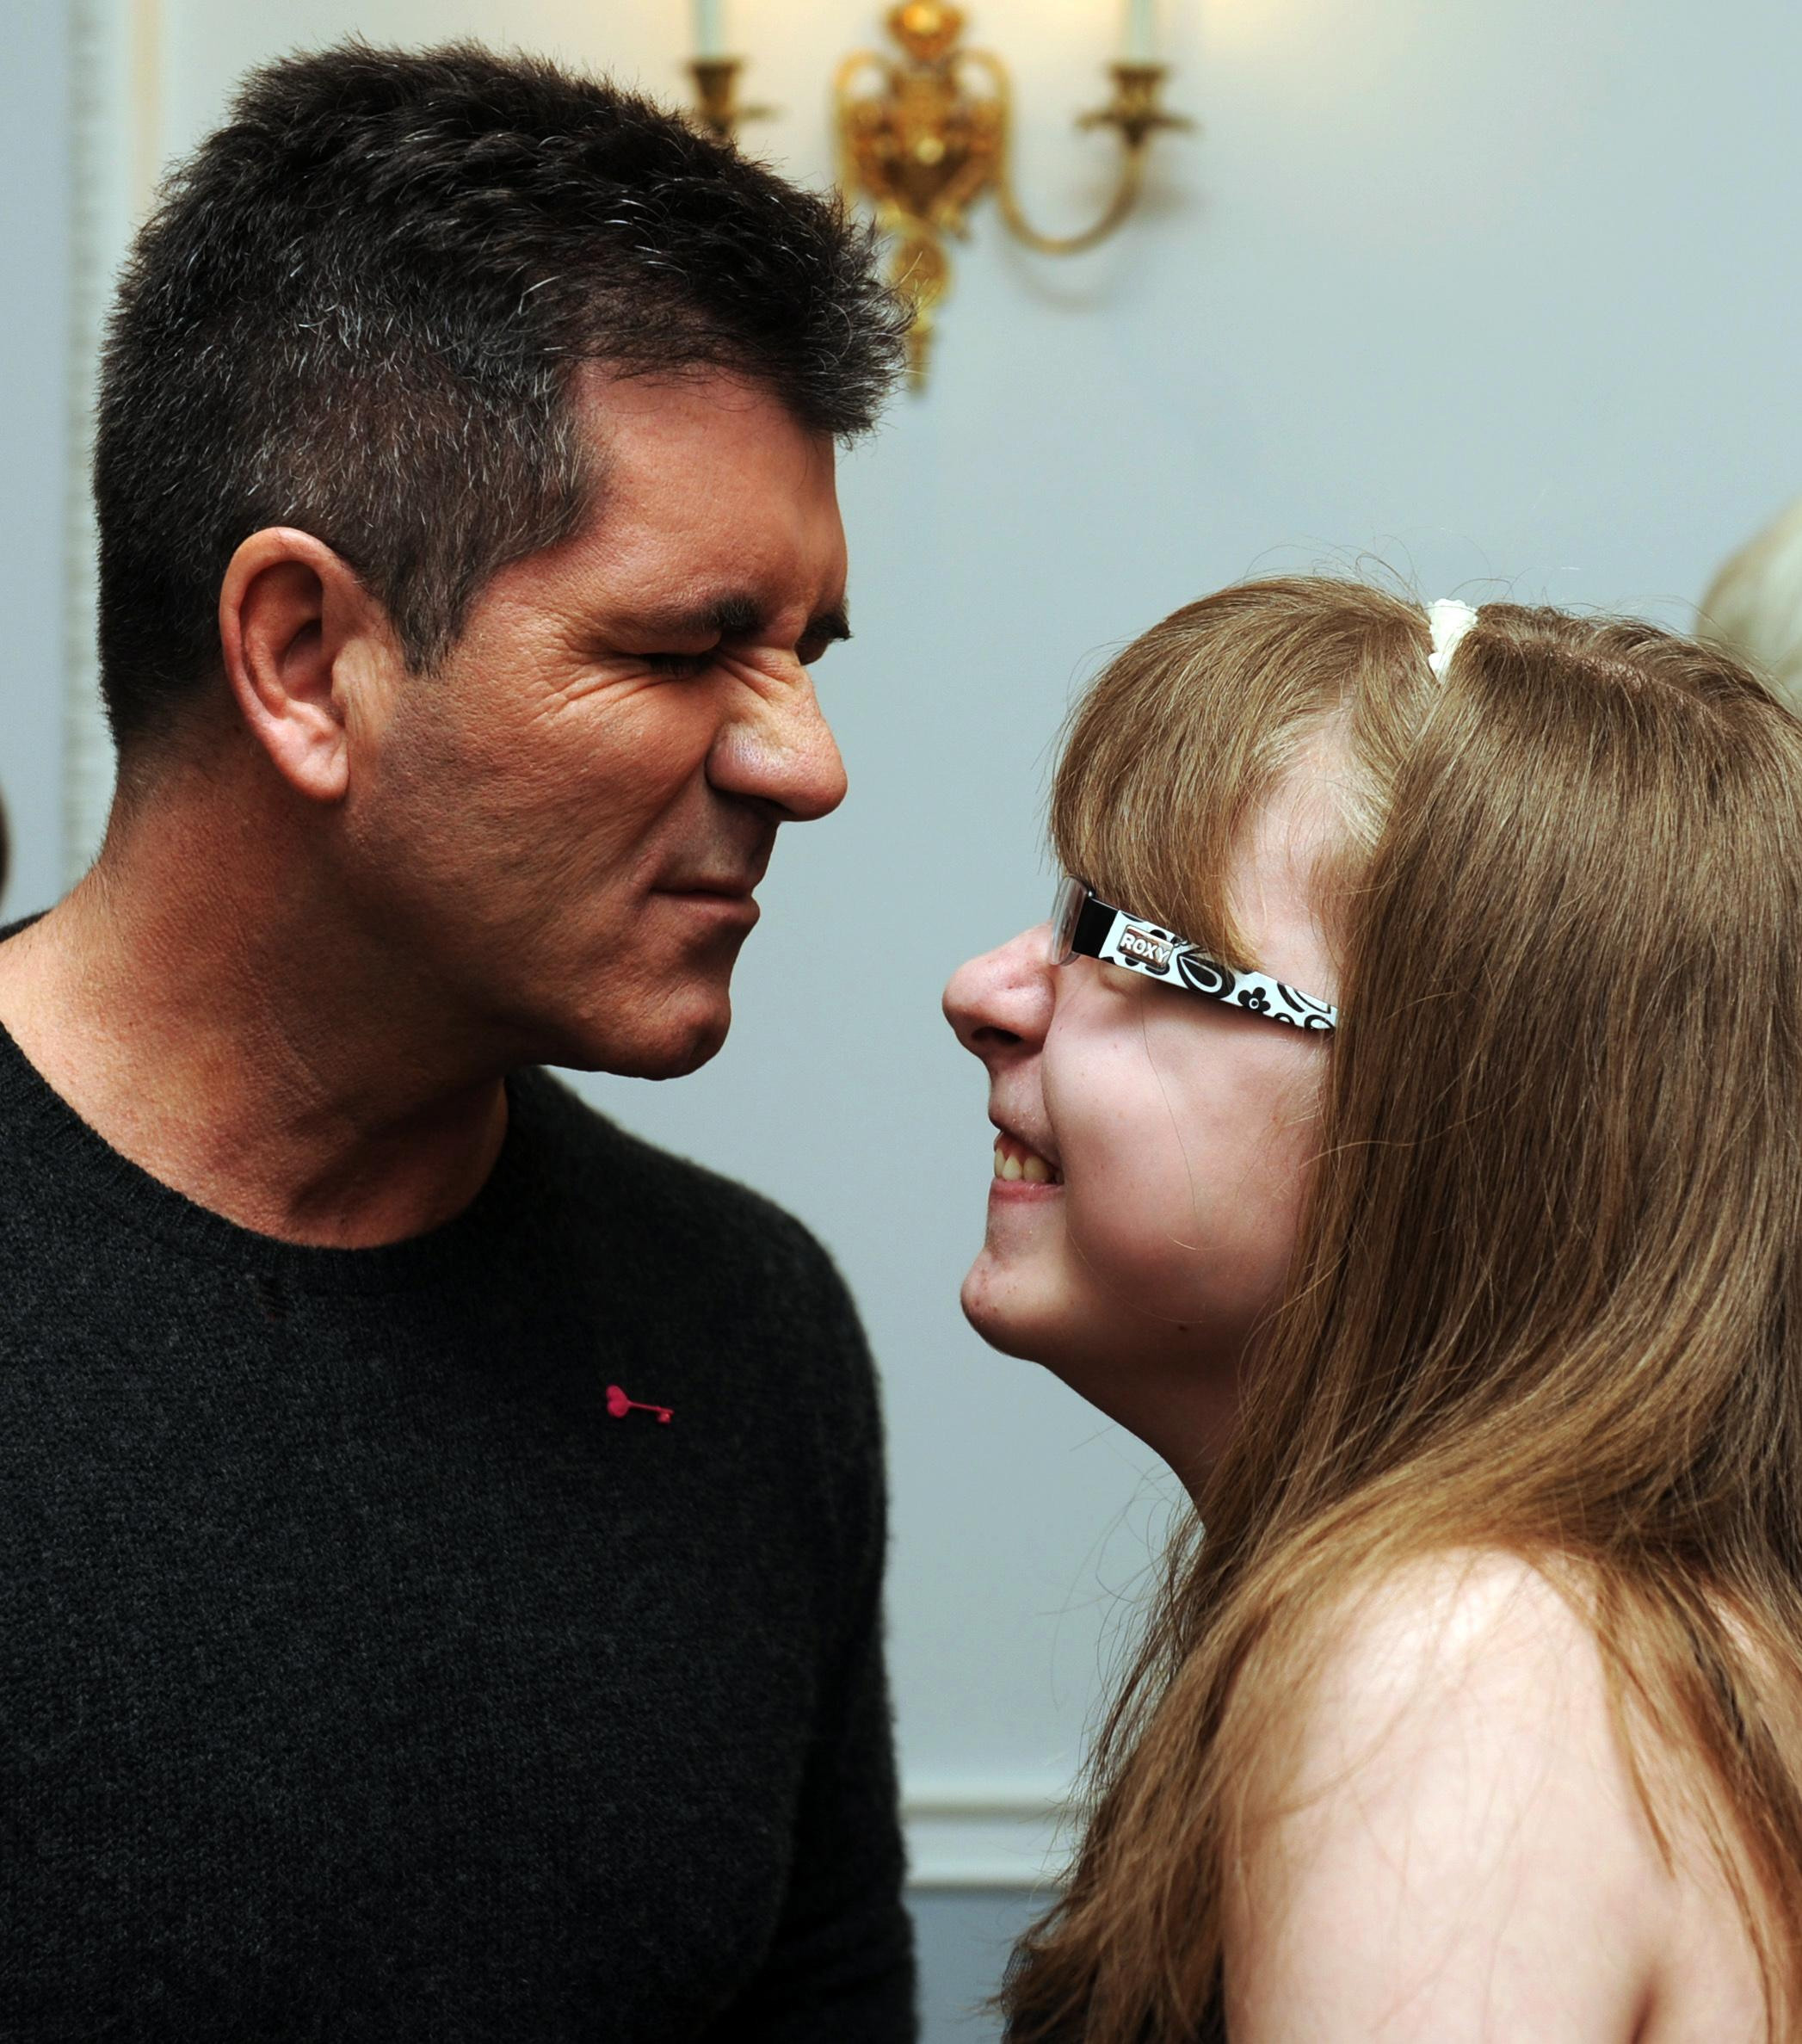 Simon Cowell meets 16 year old Sian Tolfree at a tea party in aid of the children's hospice charity Shooting Star Chase at the Dorchester Hotel in London. | Source: Getty Images